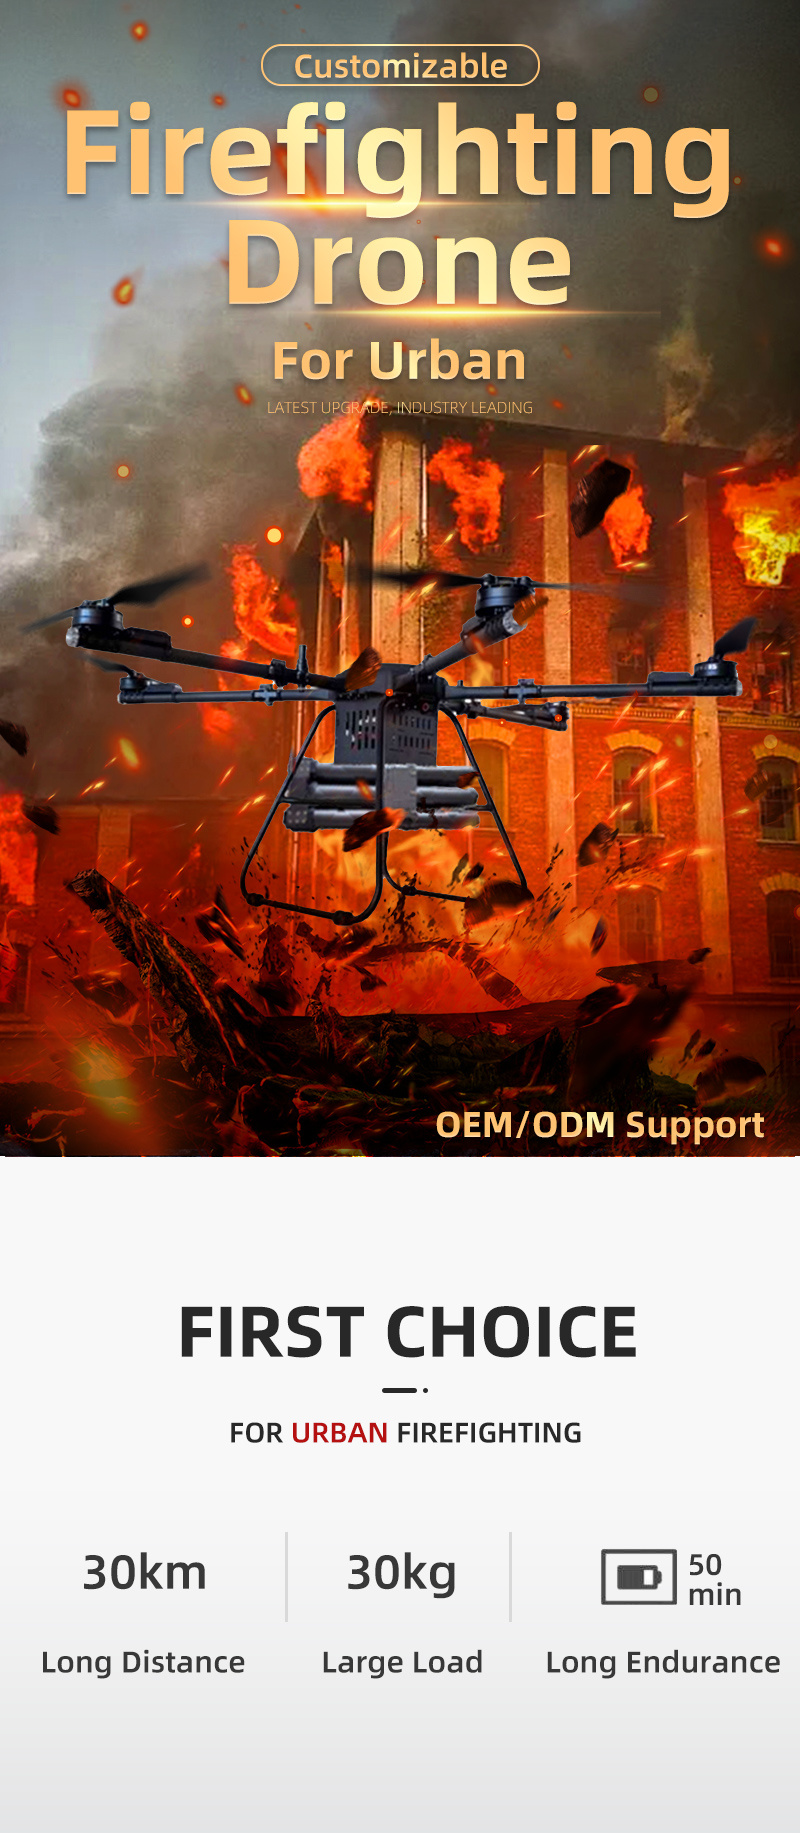 Remote Control Building Long Range Heavy Lifting Customizable 30kg Payload Firefighting Drone